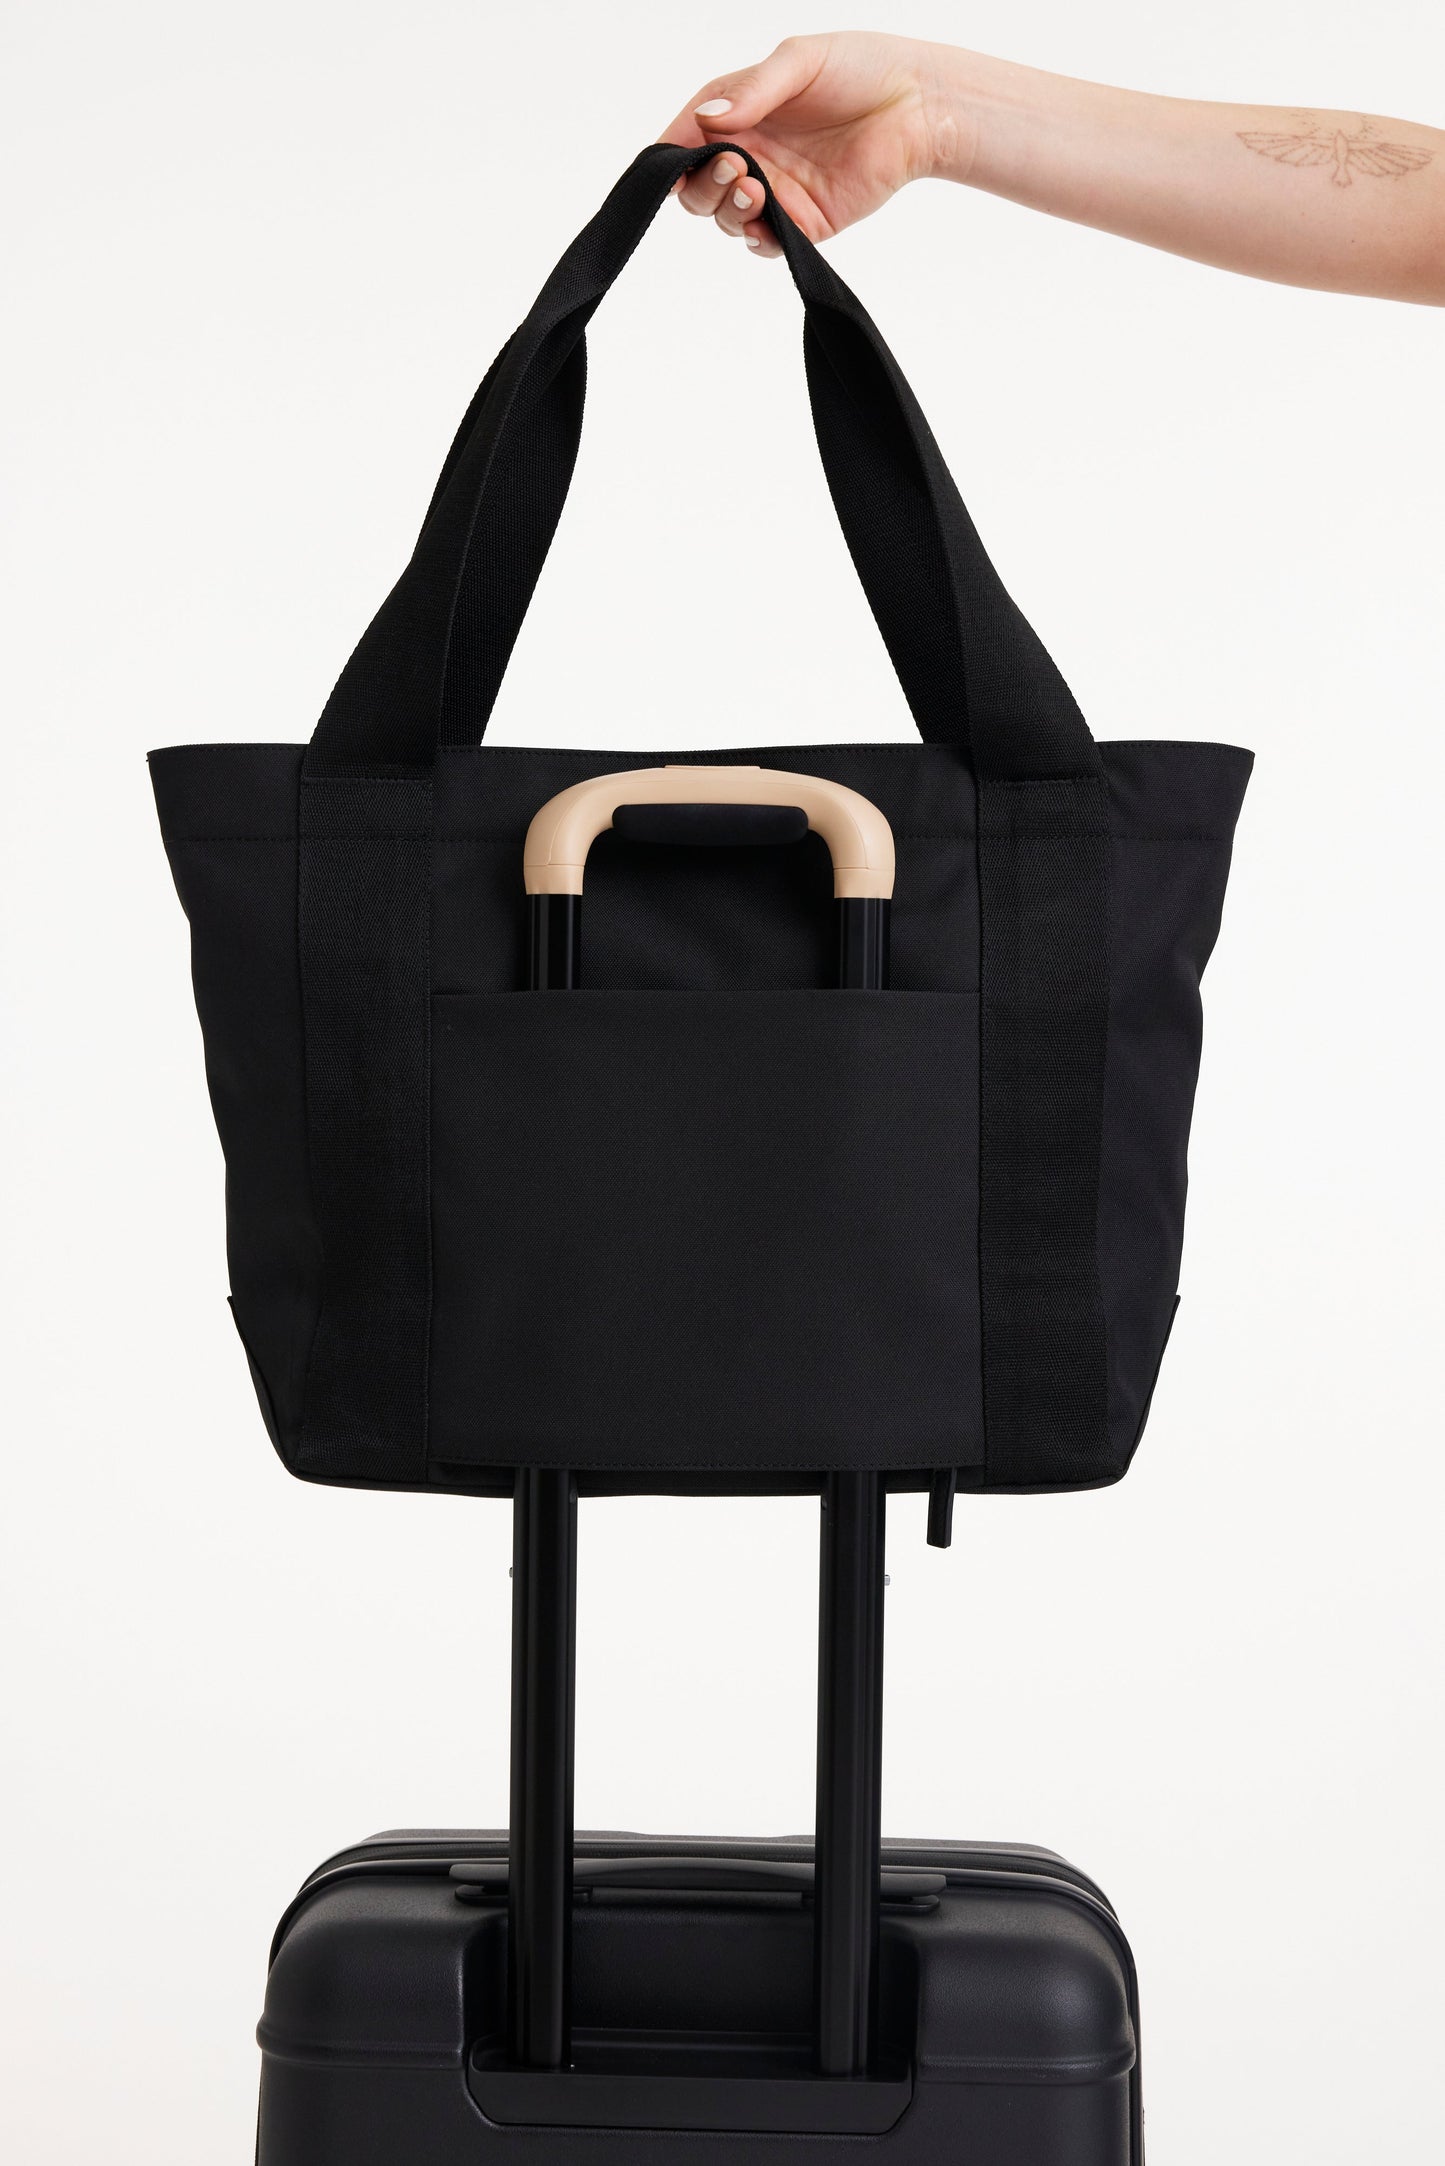 The BÉISics Tote in Black